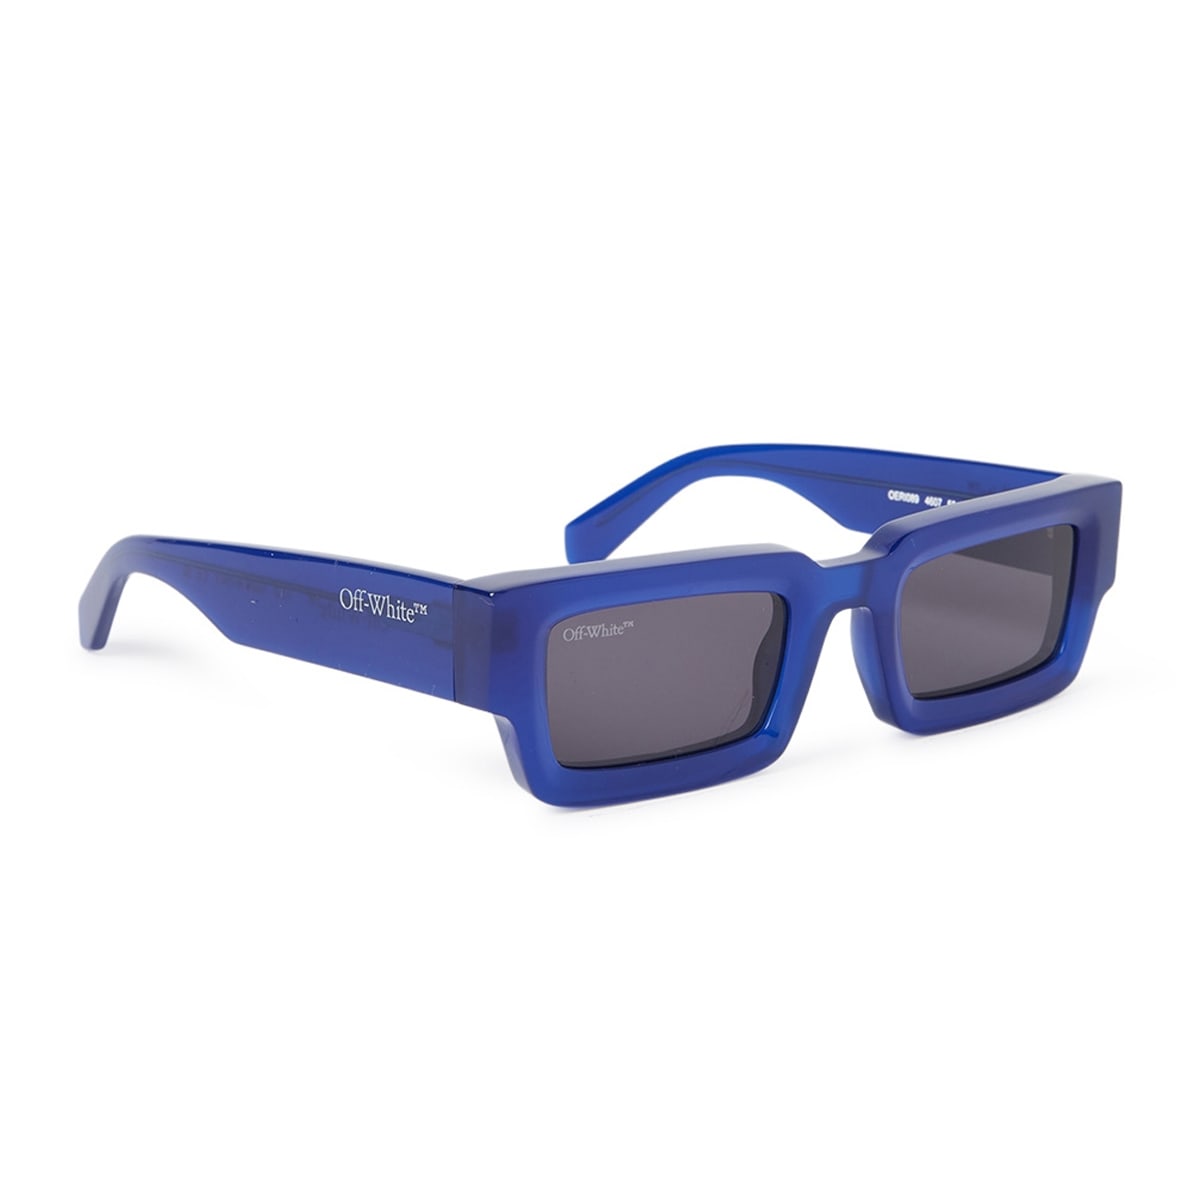 Lecce Sunglasses in blue  Off-White™ Official US